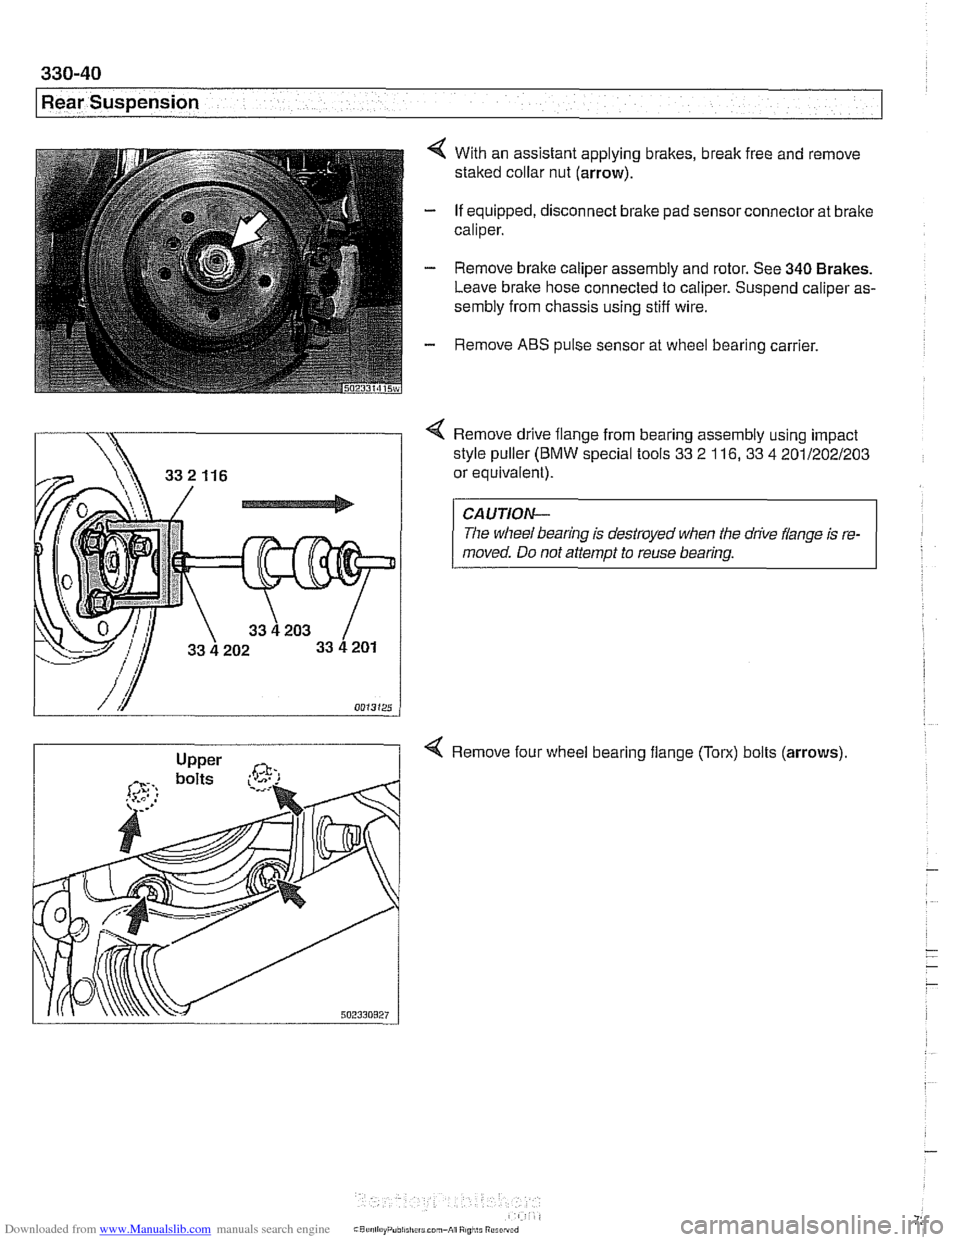 BMW 528i 2001 E39 Workshop Manual Downloaded from www.Manualslib.com manuals search engine 
330-40 
Rear Suspension 
4 With an assistant applying brakes, break free and  remove 
staked  collar nut  (arrow). 
- If equipped,  disconnect